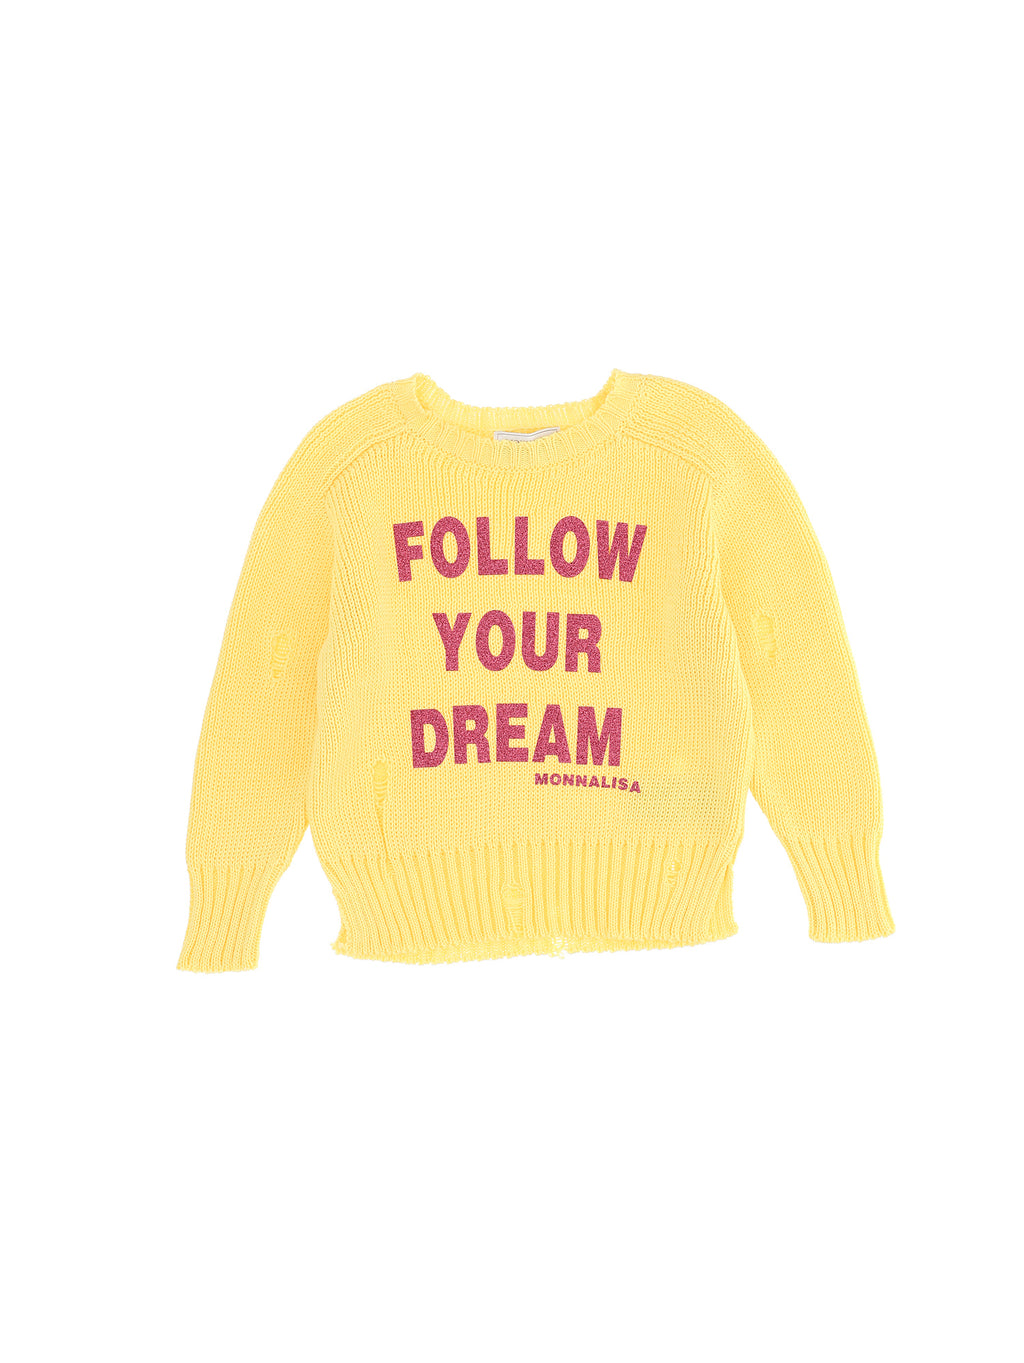 "Follow your Dream" Sweater